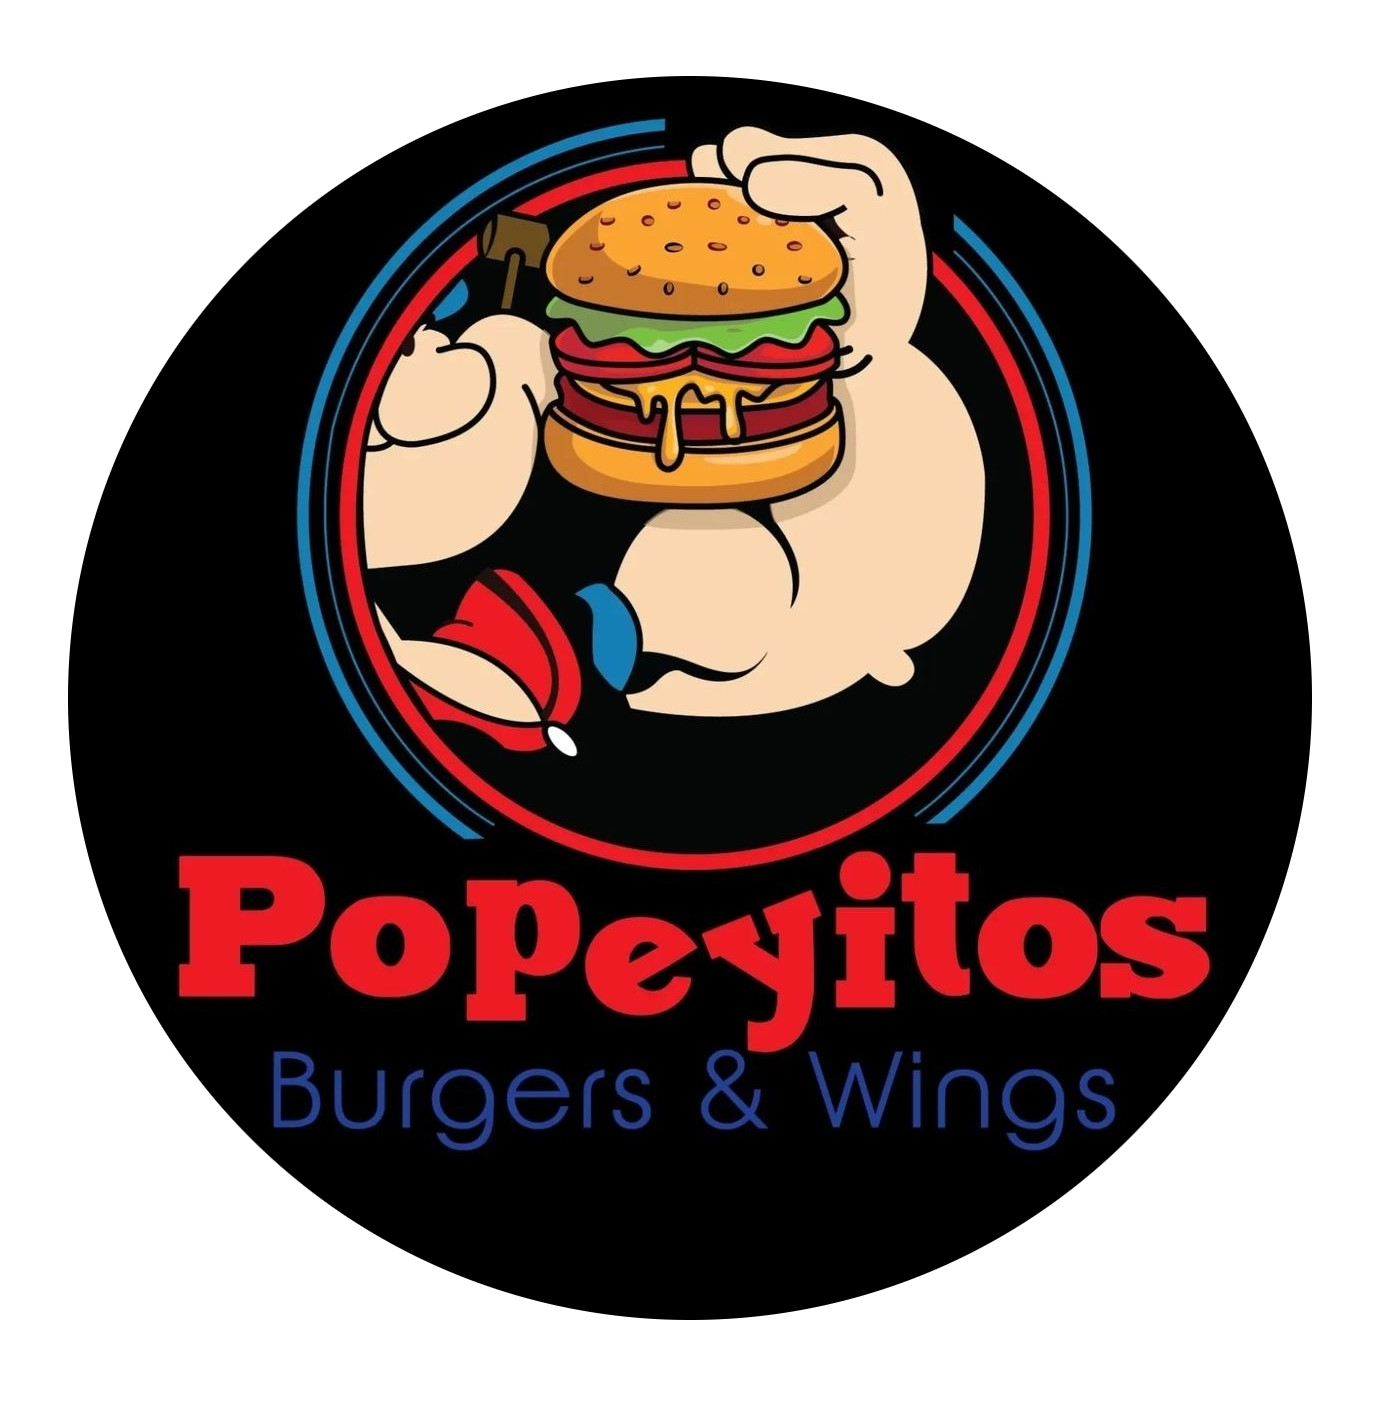 Popeyitos Burgers & Wings